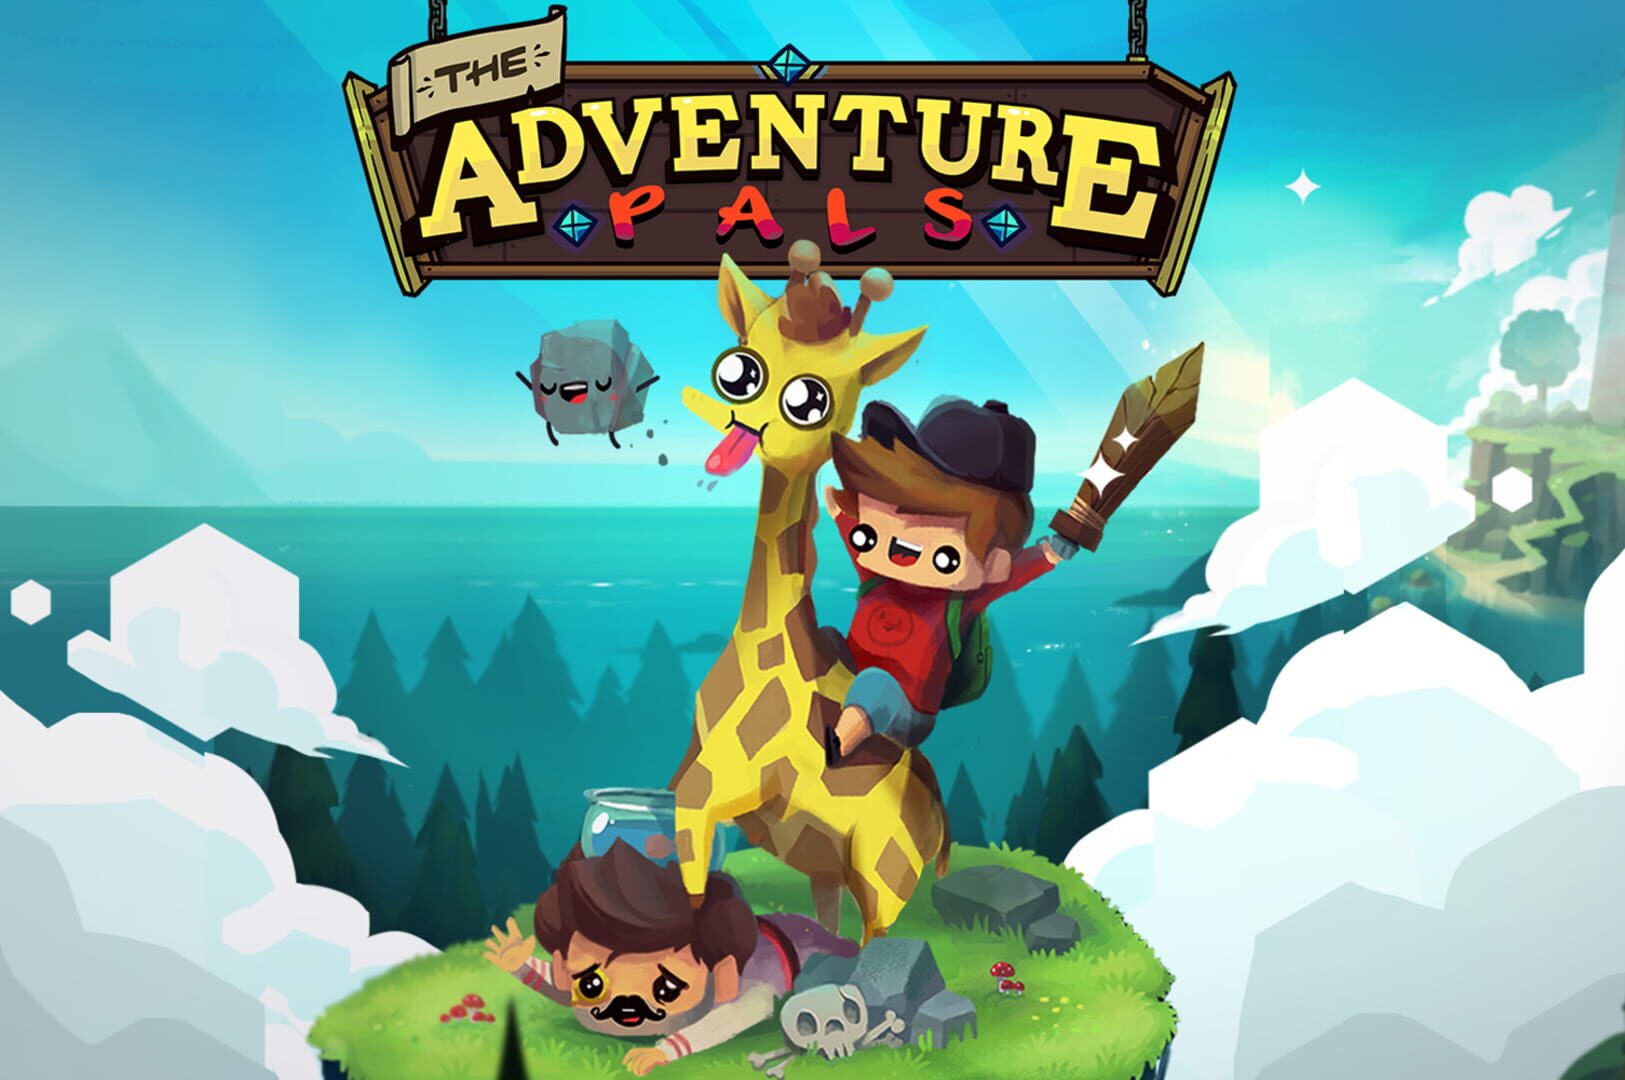 Artwork for The Adventure Pals